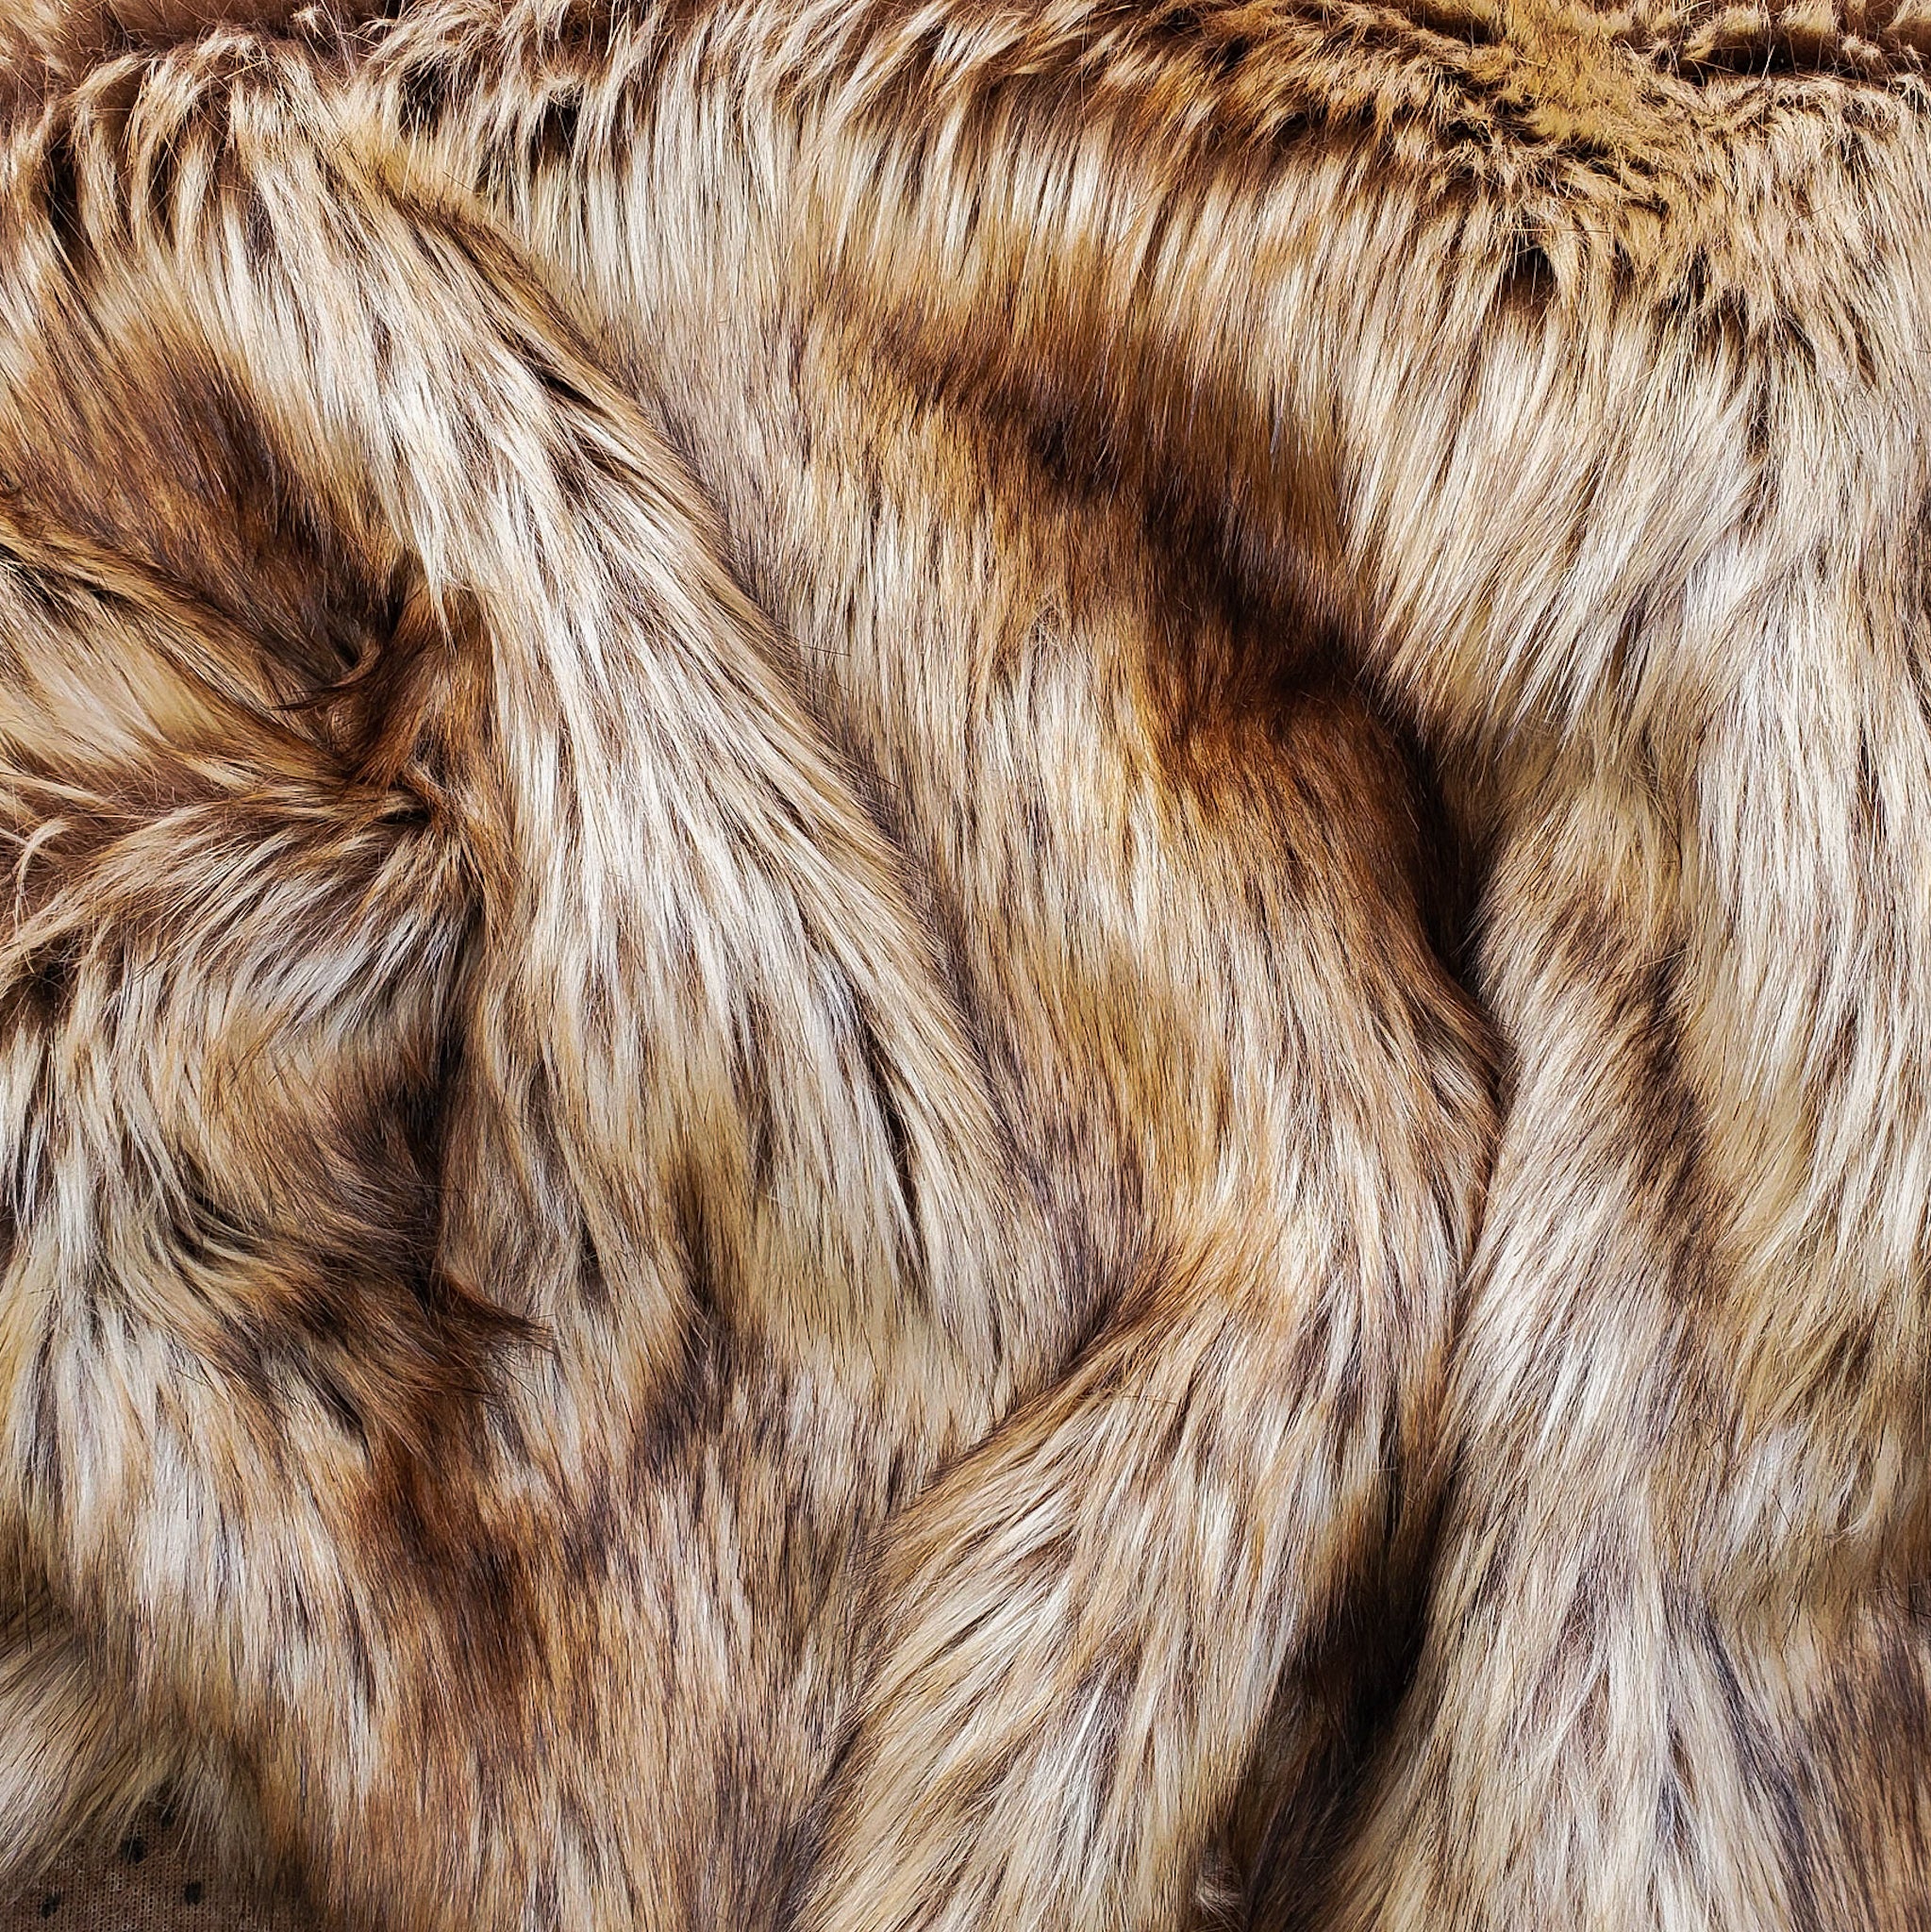 Dark Brown Shaggy Mohair Animal Long Pile Faux Fur Fabric By The Yard, Fake Fur Material, 60” Wide